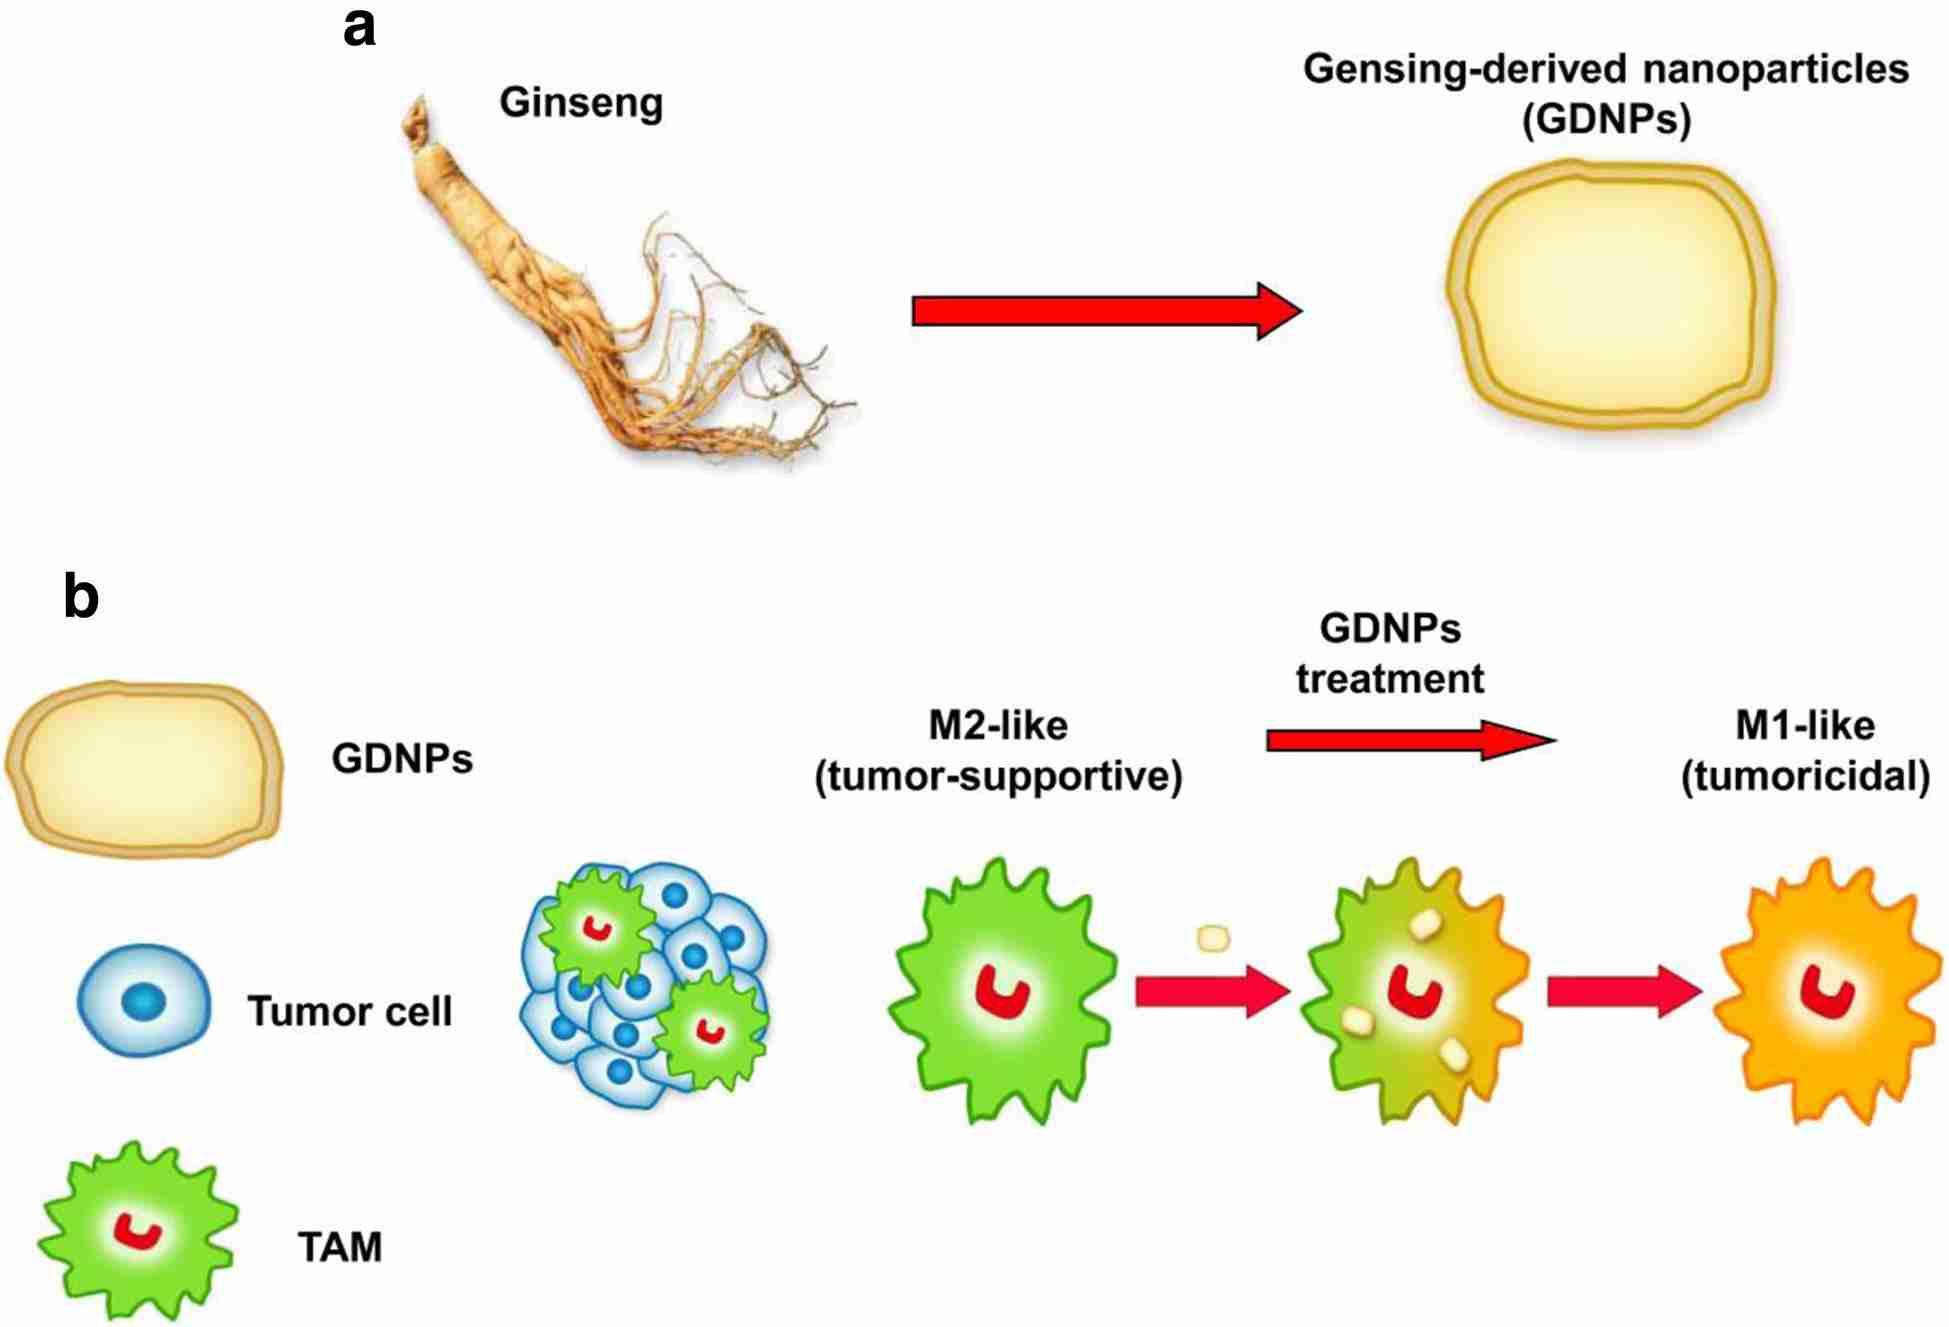 Proposed strategy for the ginseng-derived nanoparticles (GDNPs) to reprogramme macrophage polarization. (Cao, et al., 2019)